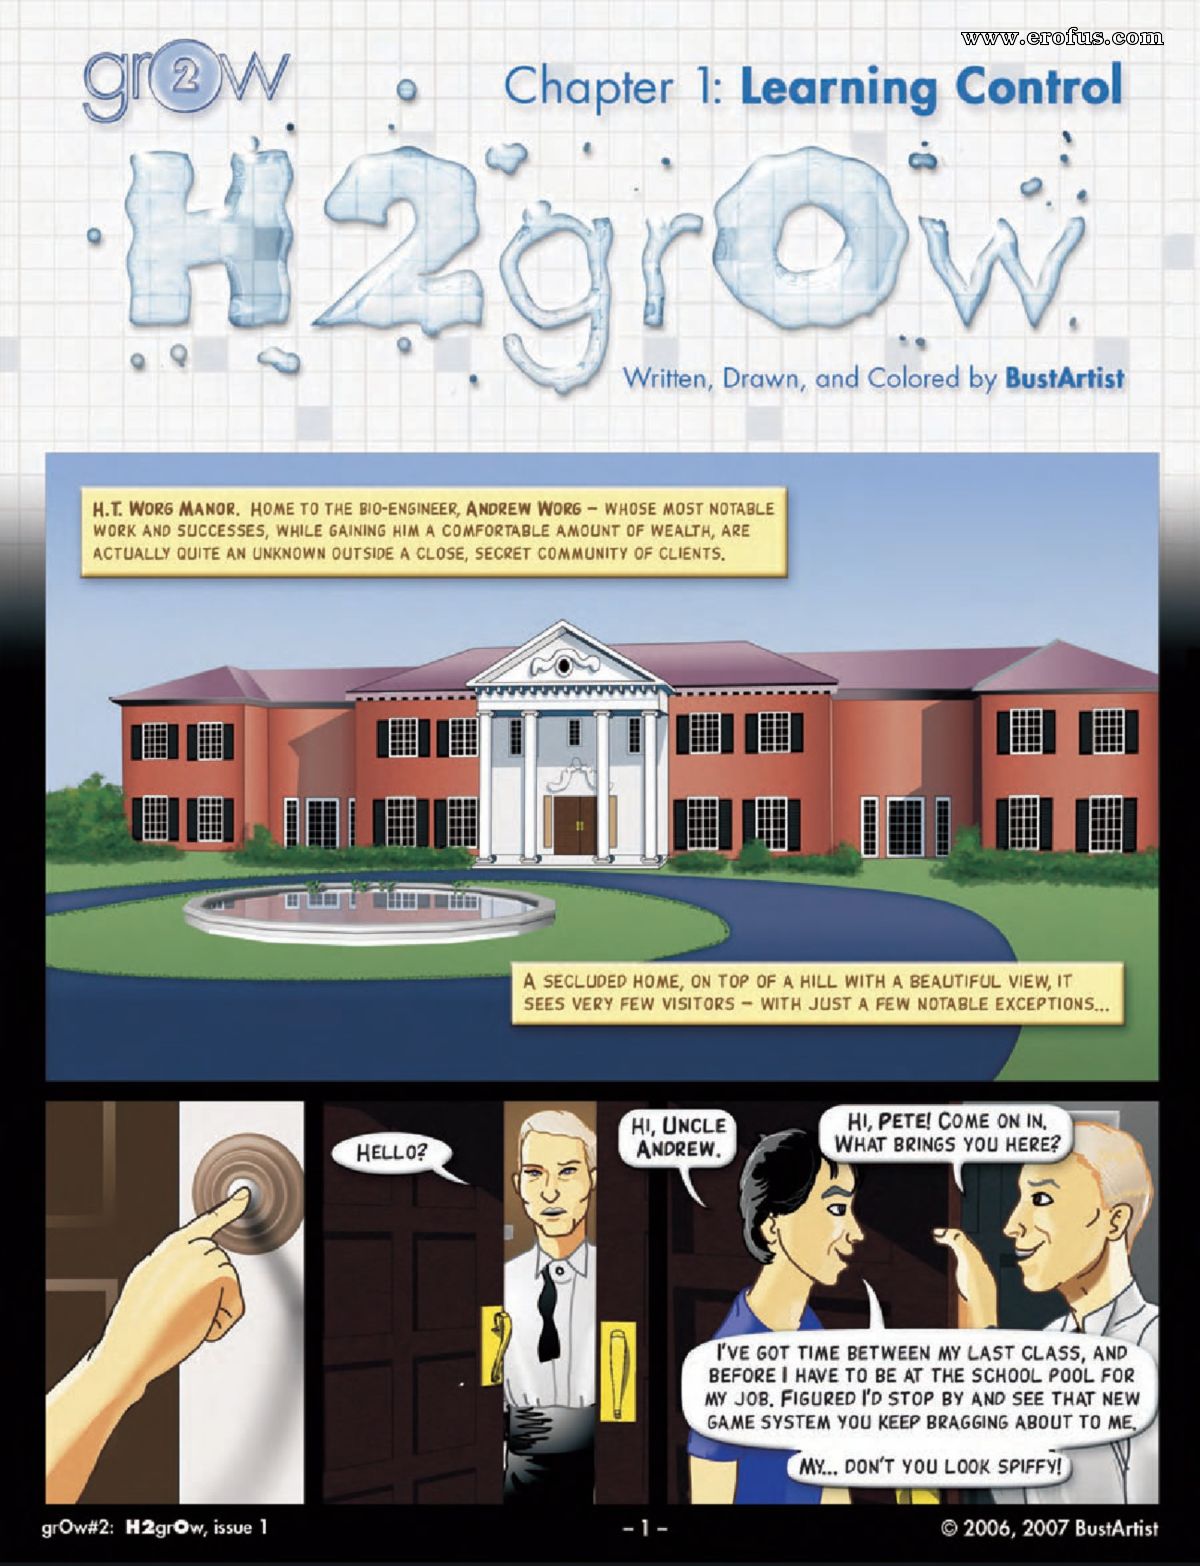 picture Grow-Comics-Issue-1-006.jpg